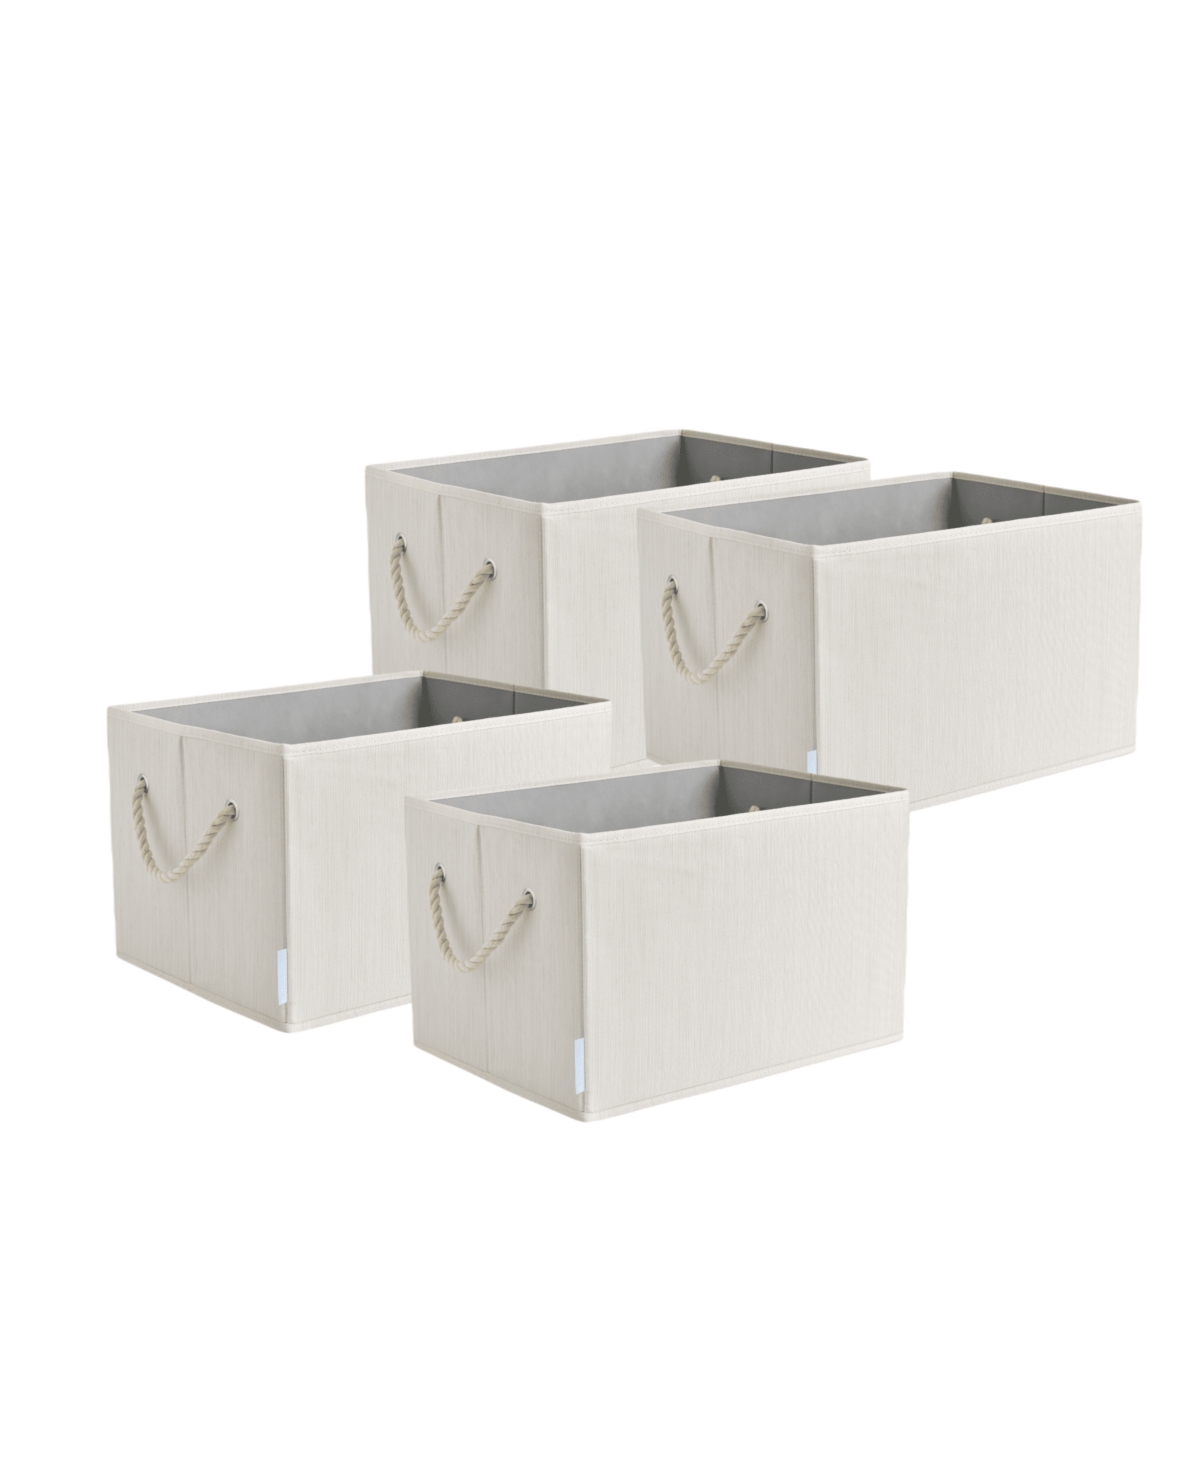 Wethinkstorage 34 Litre Collapsible Fabric Storage Bins With Cotton Rope Handles, Set Of 4 In Ivory